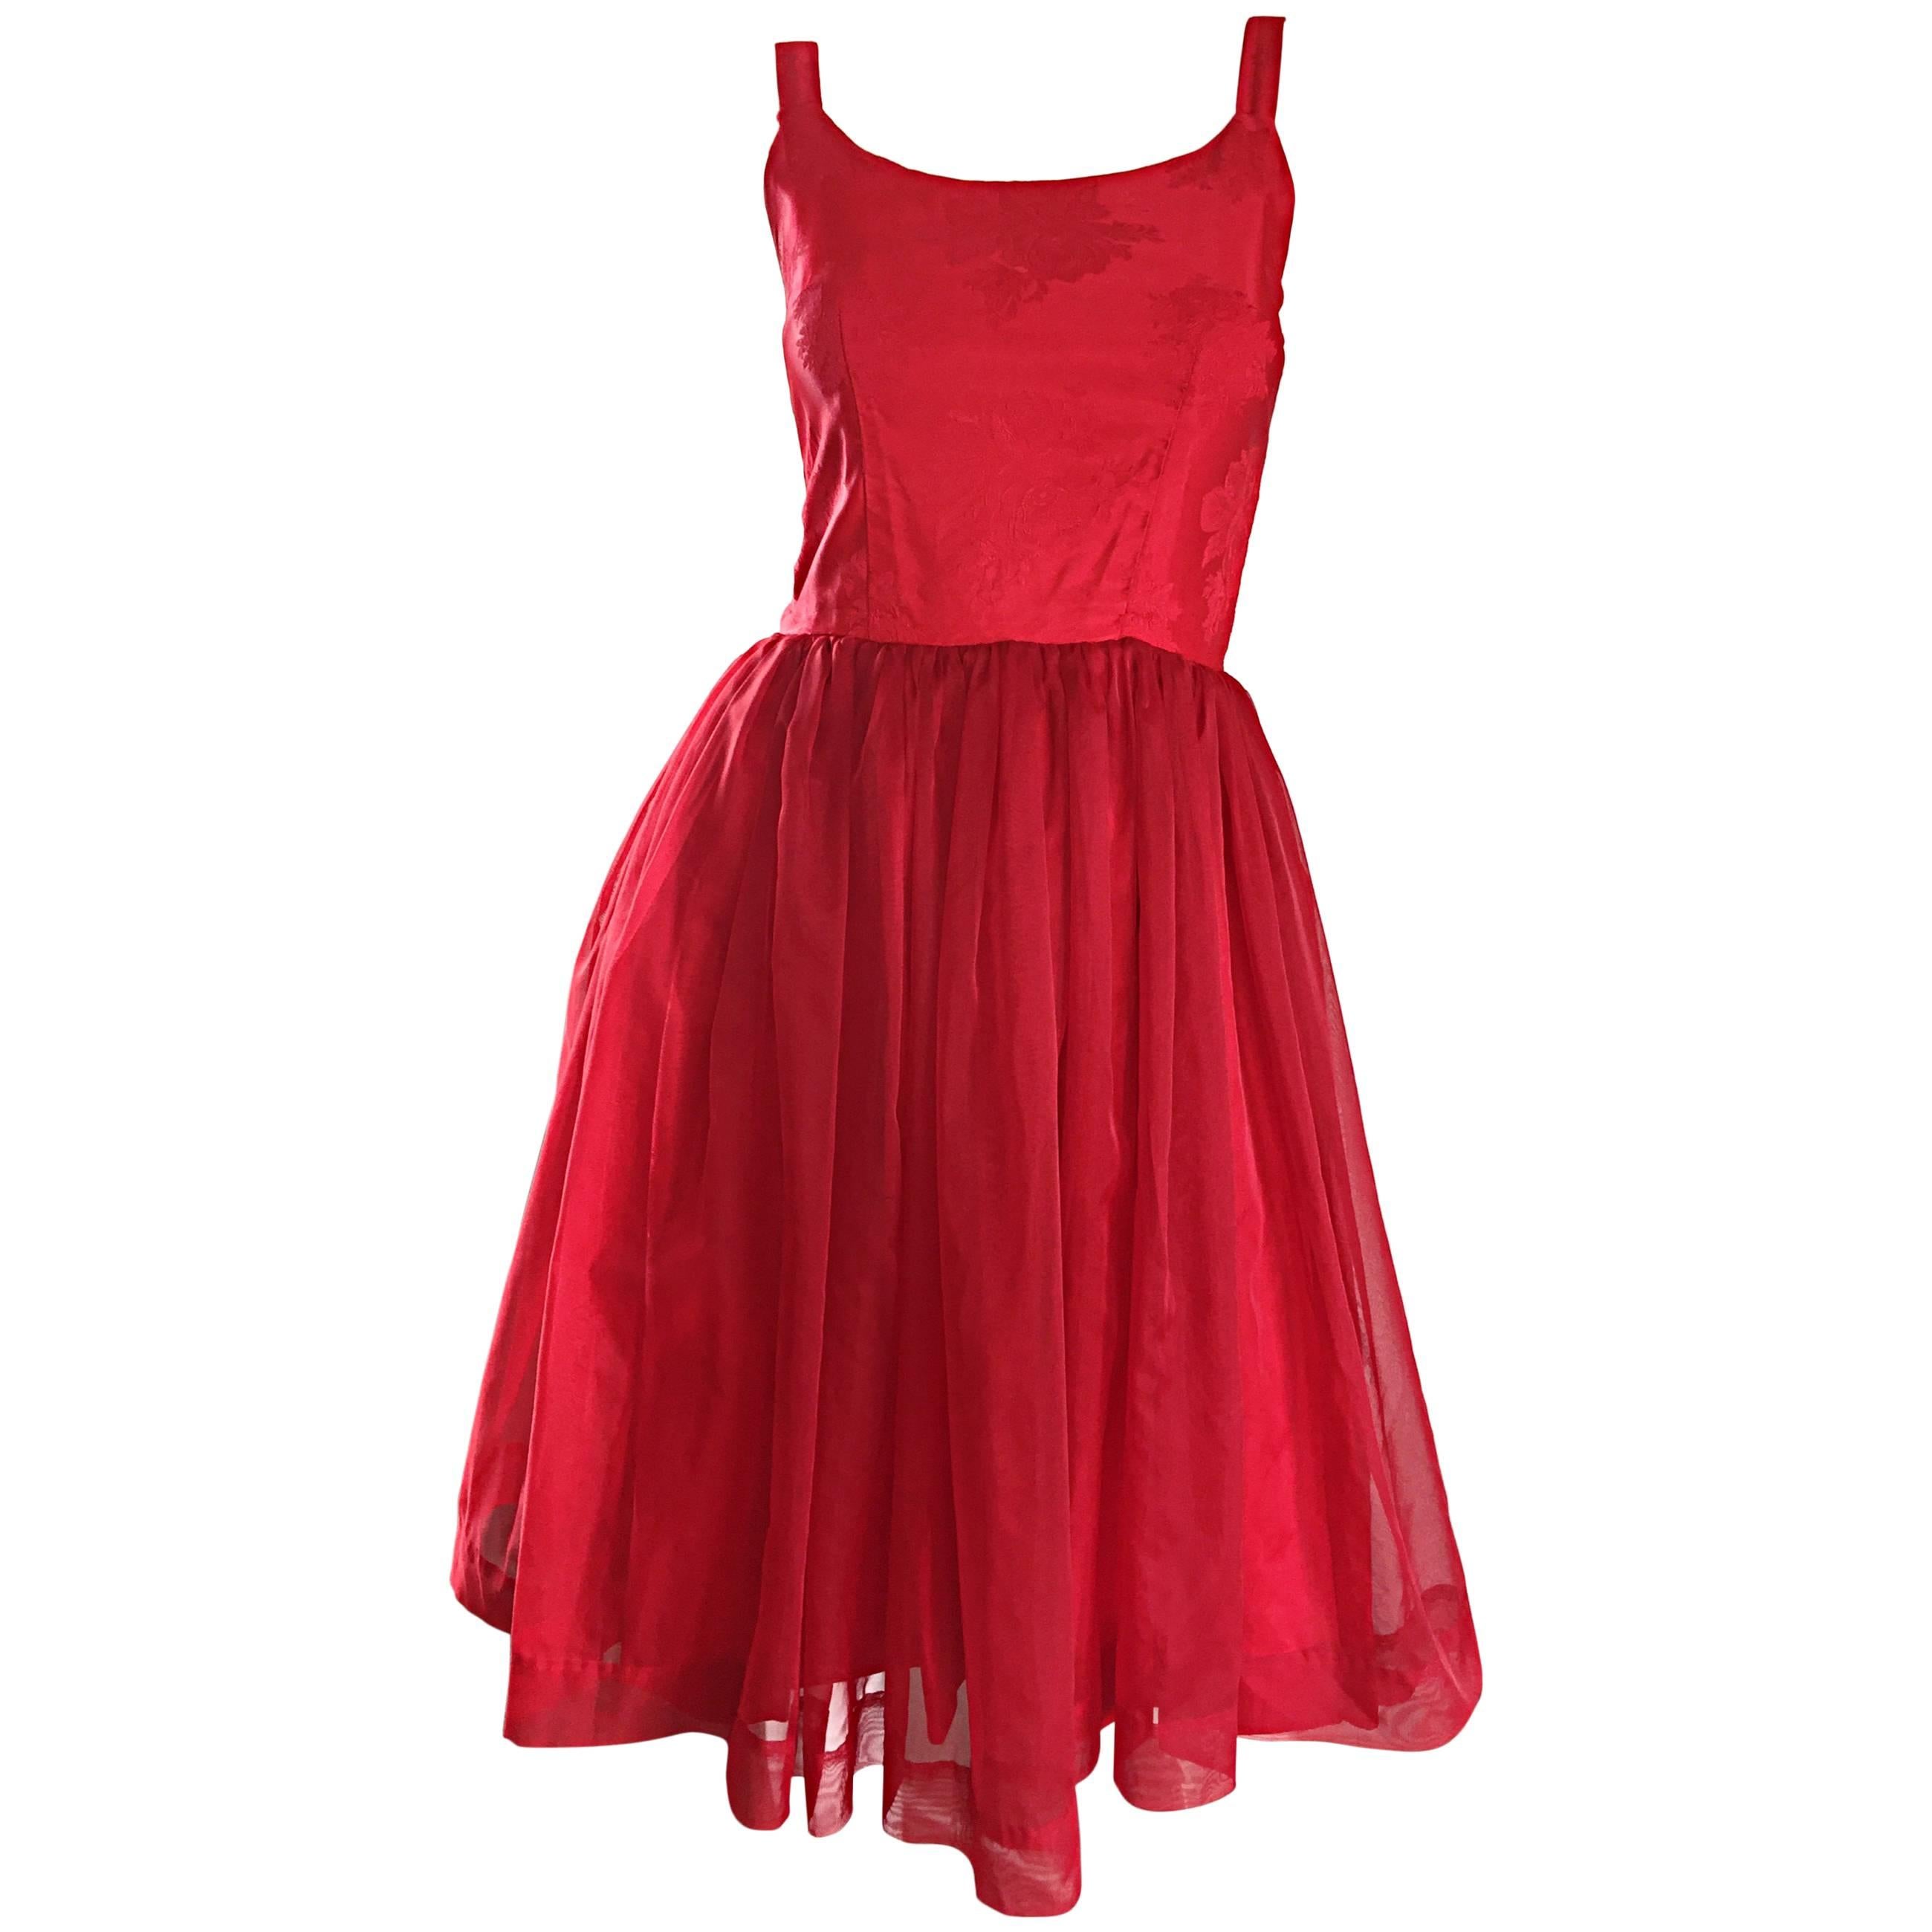 Gorgeous 1950s 50s Lipstick Red Demi Couture Silk Brocade Cocktail Dress For Sale